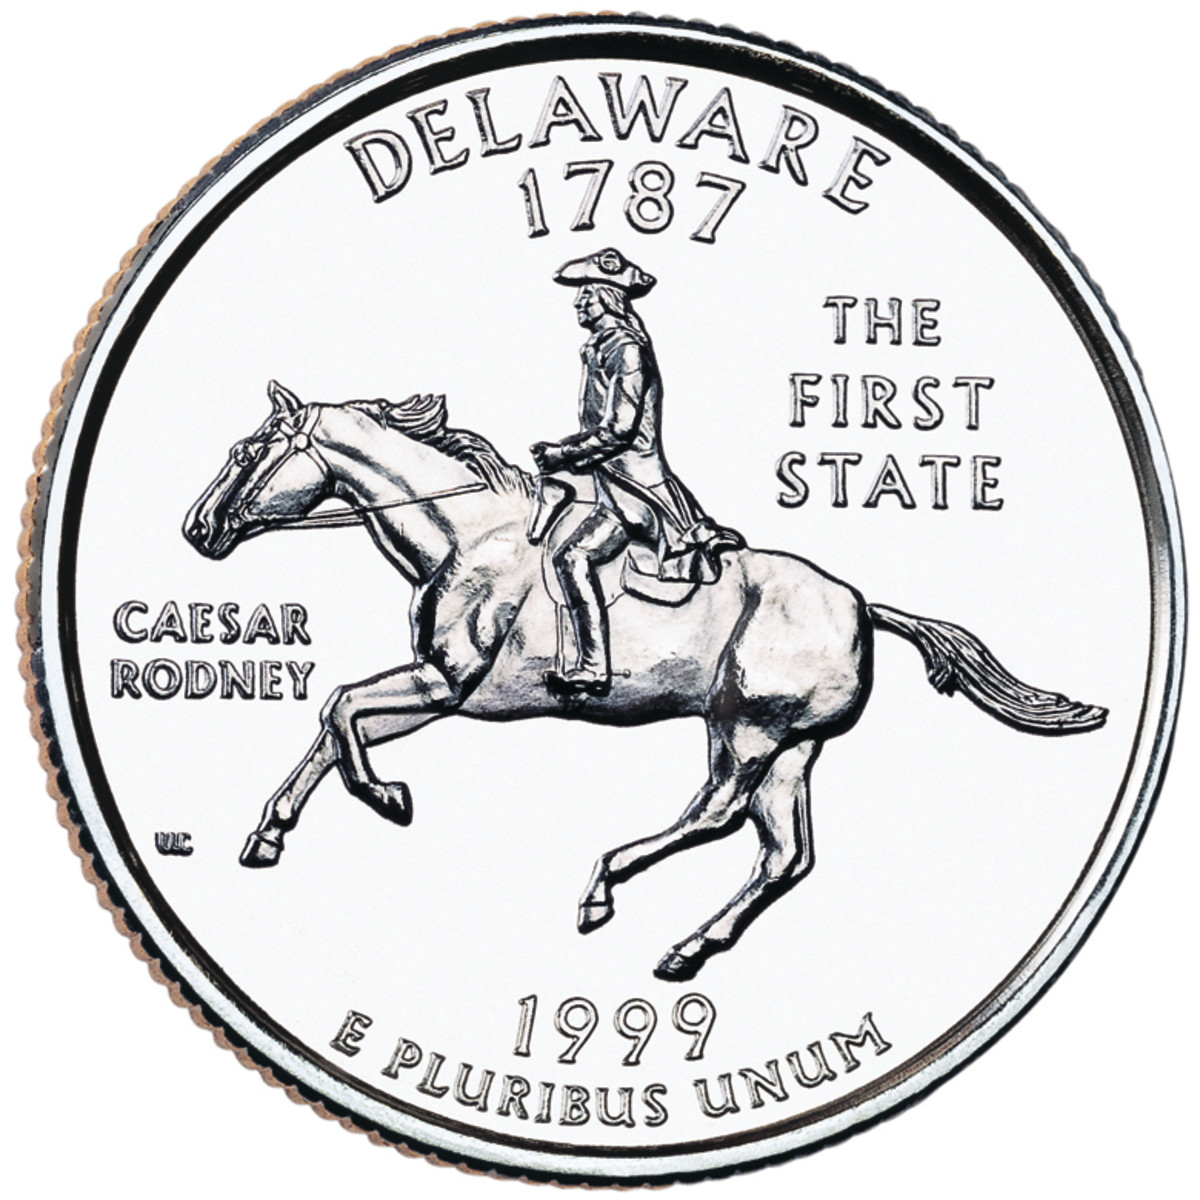 The Delaware quarter was the first in the series to be released.